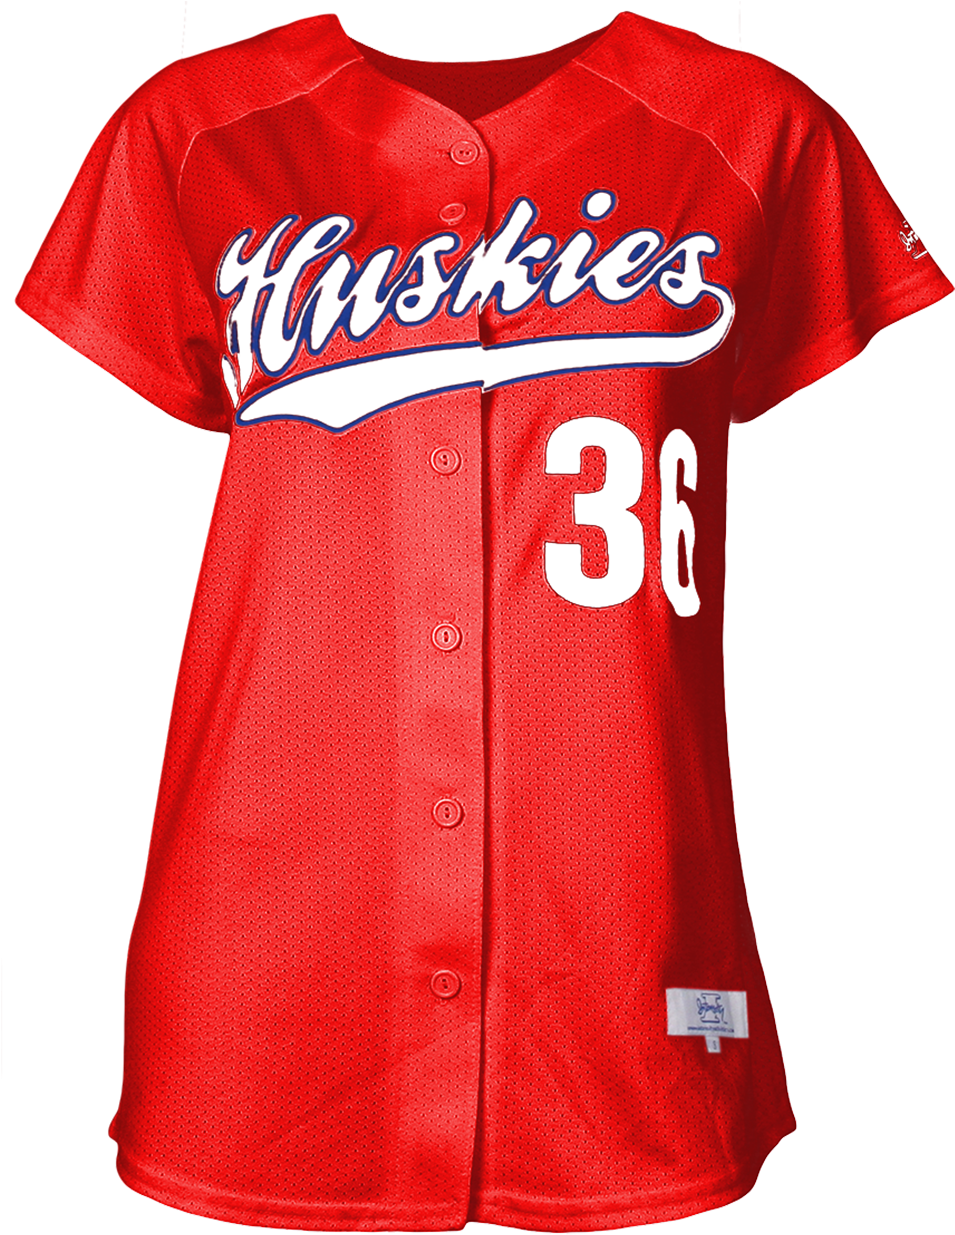 Red Huskies Baseball Jersey Number36 PNG